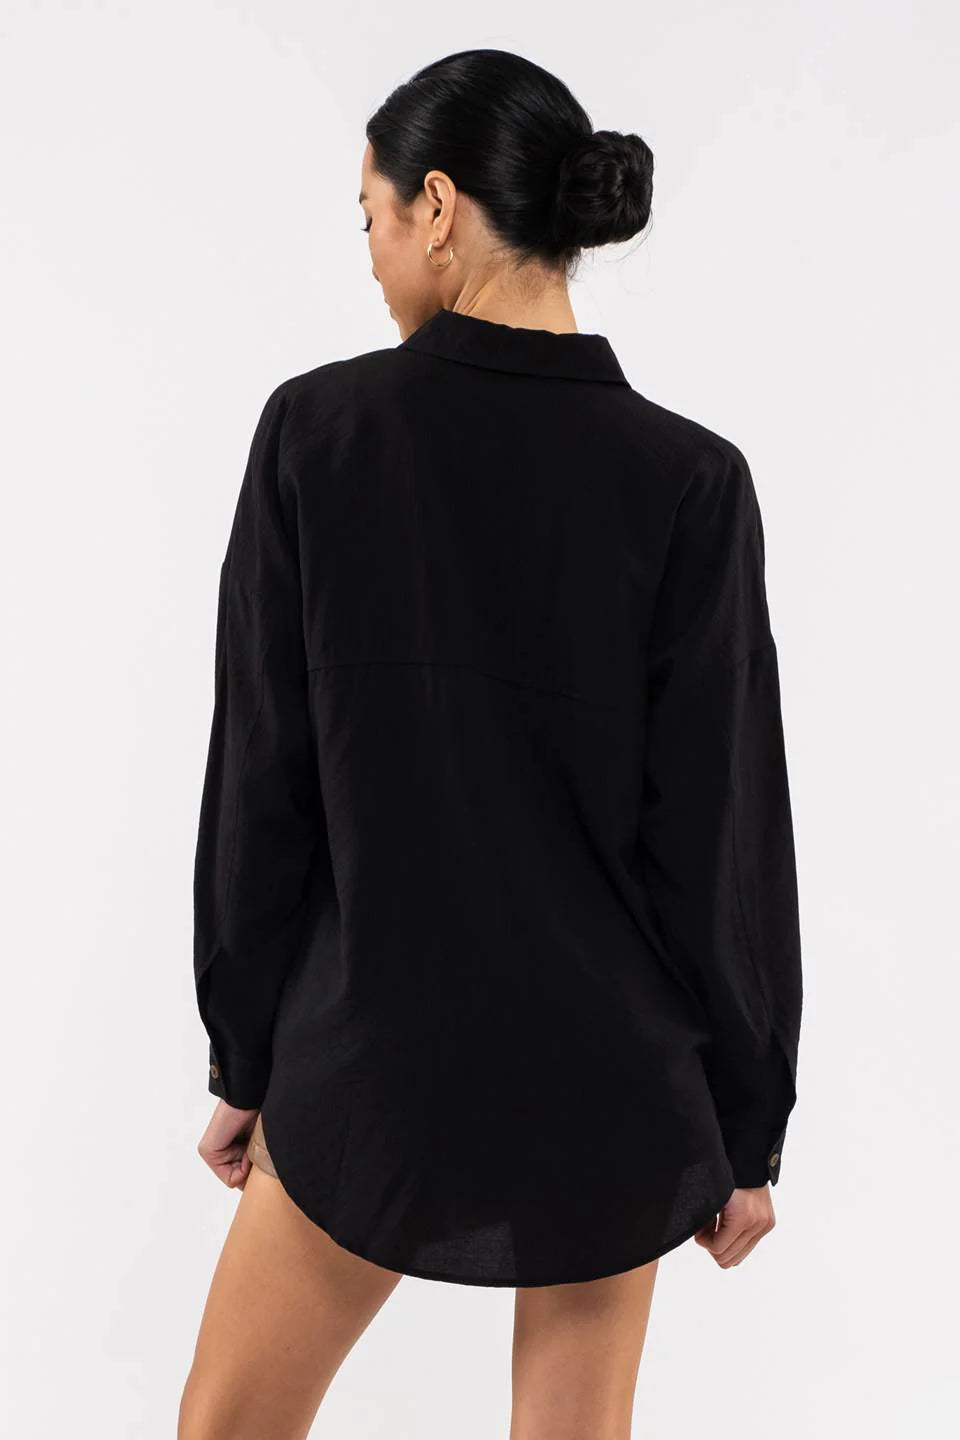 Final Sale Collared Button Down Long Sleeve Top Black